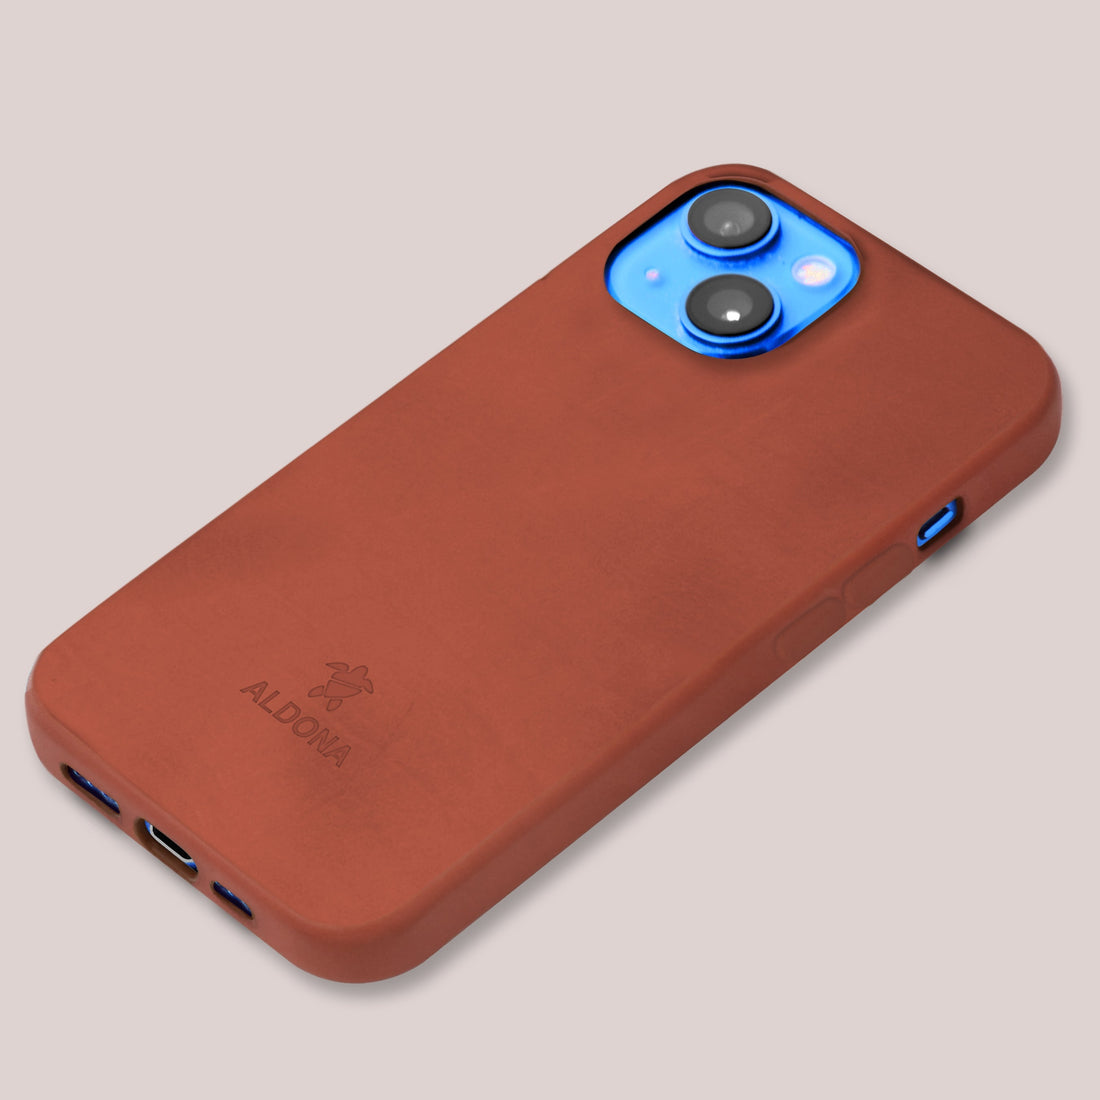 Kalon Case for iPhone 13 series with MagSafe Compatibility - Cognac